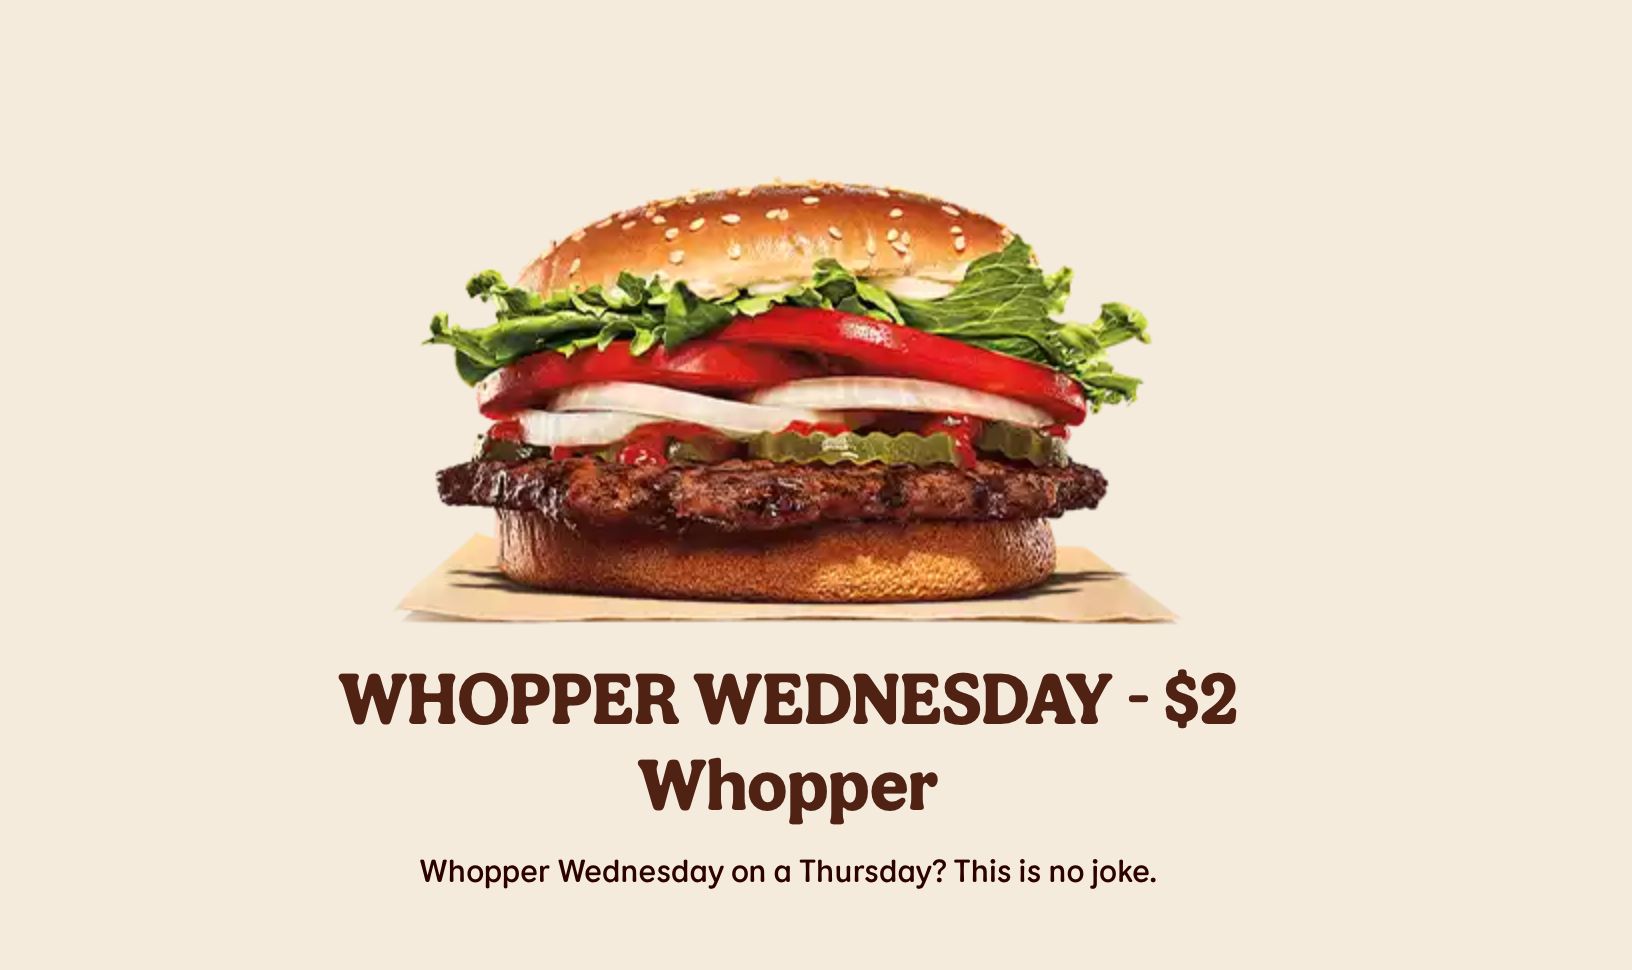 $2 Whoppers At Burger King Today April 1st! AND MORE DEALS WHEN YOU ORDER FROM THE BURGER KING APP!